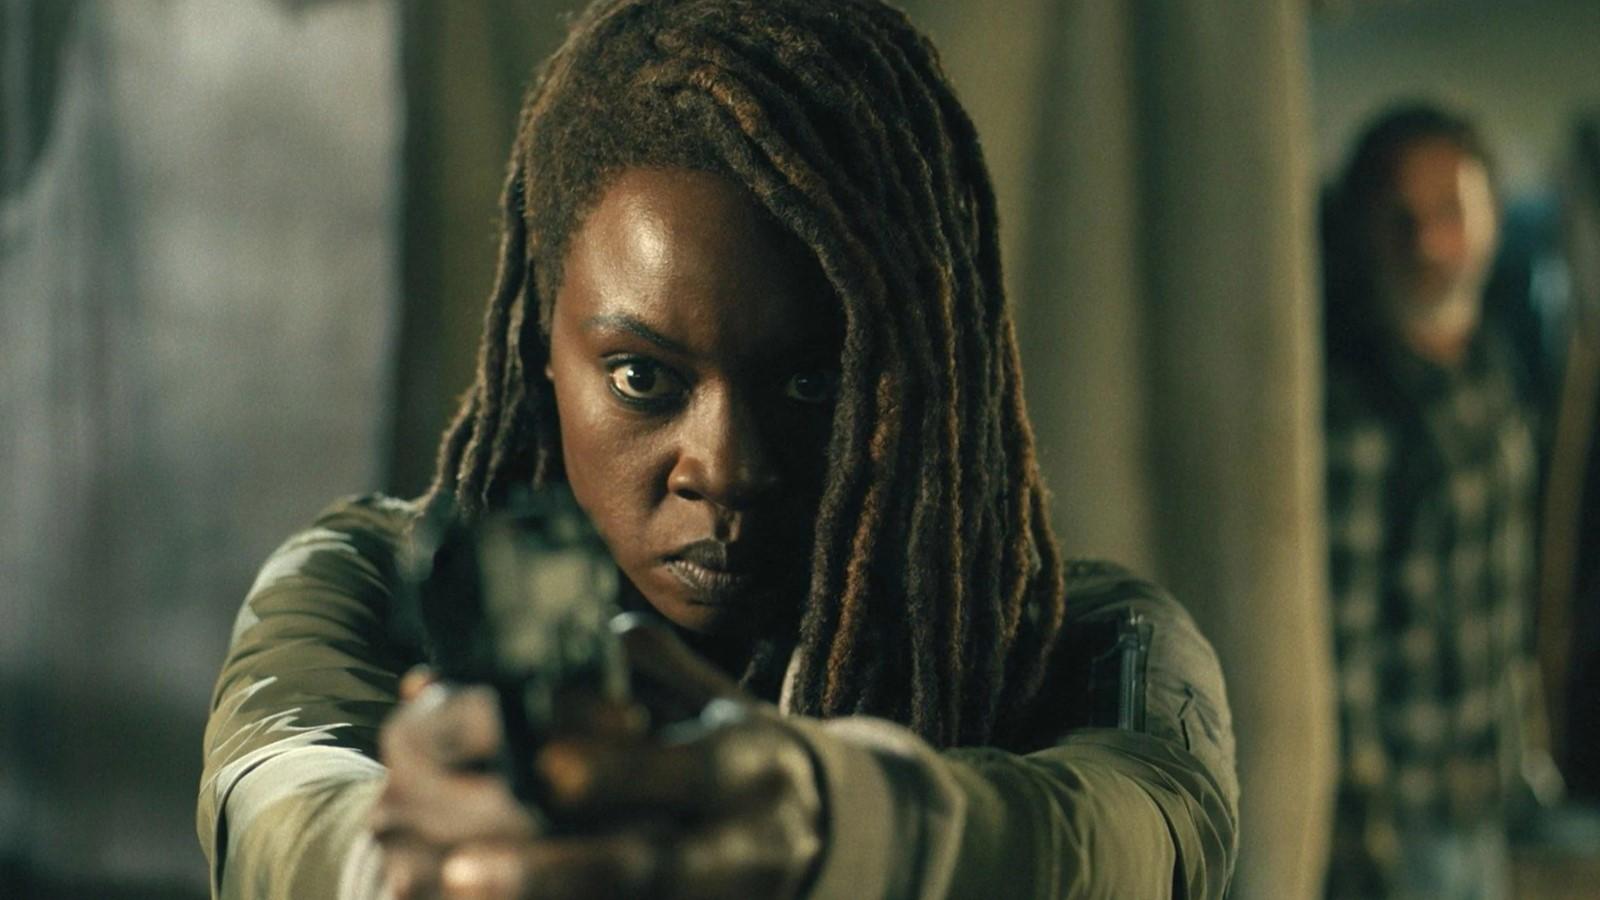 Danai Gurira as Michonne in The Walking Dead: The Ones Who Live Episode 5